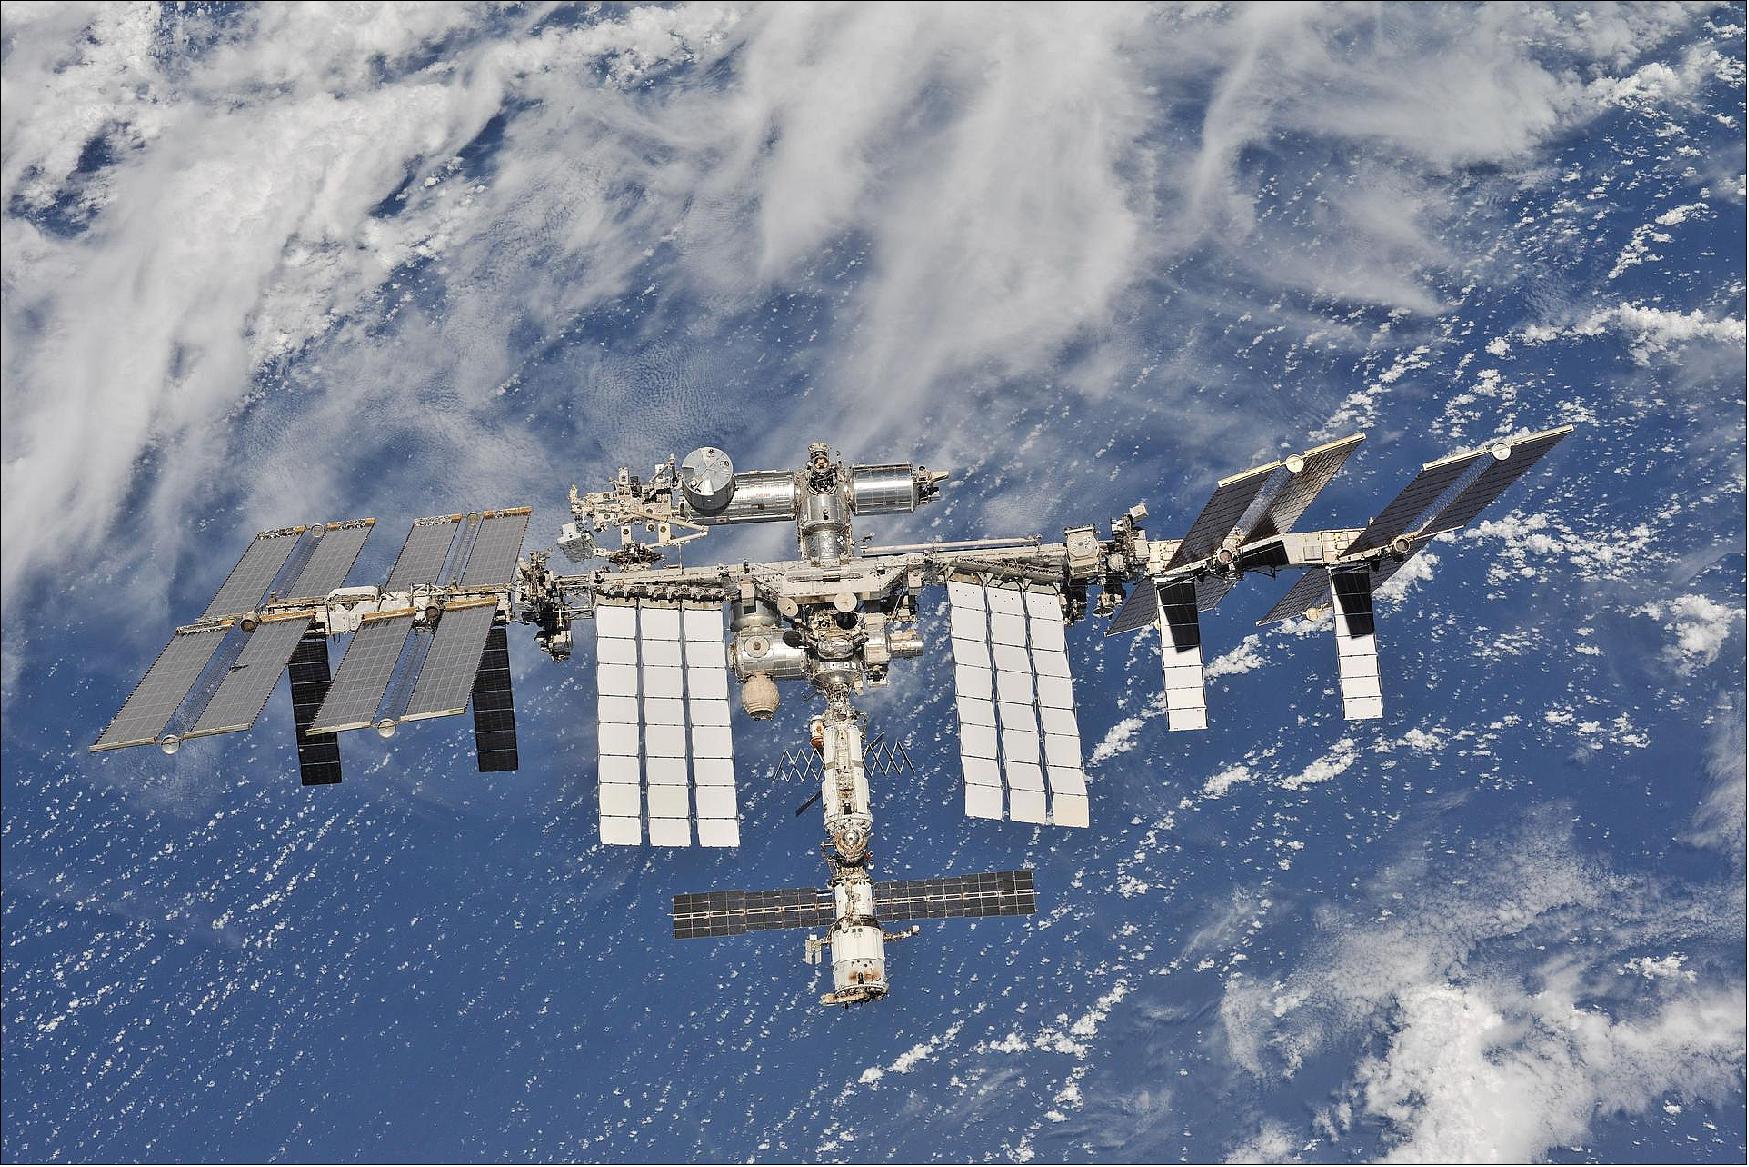 Figure 92: The International Space Station photographed by Expedition 56 crew members from a Soyuz spacecraft after undocking, Oct. 4, 2018 (image credit: NASA)